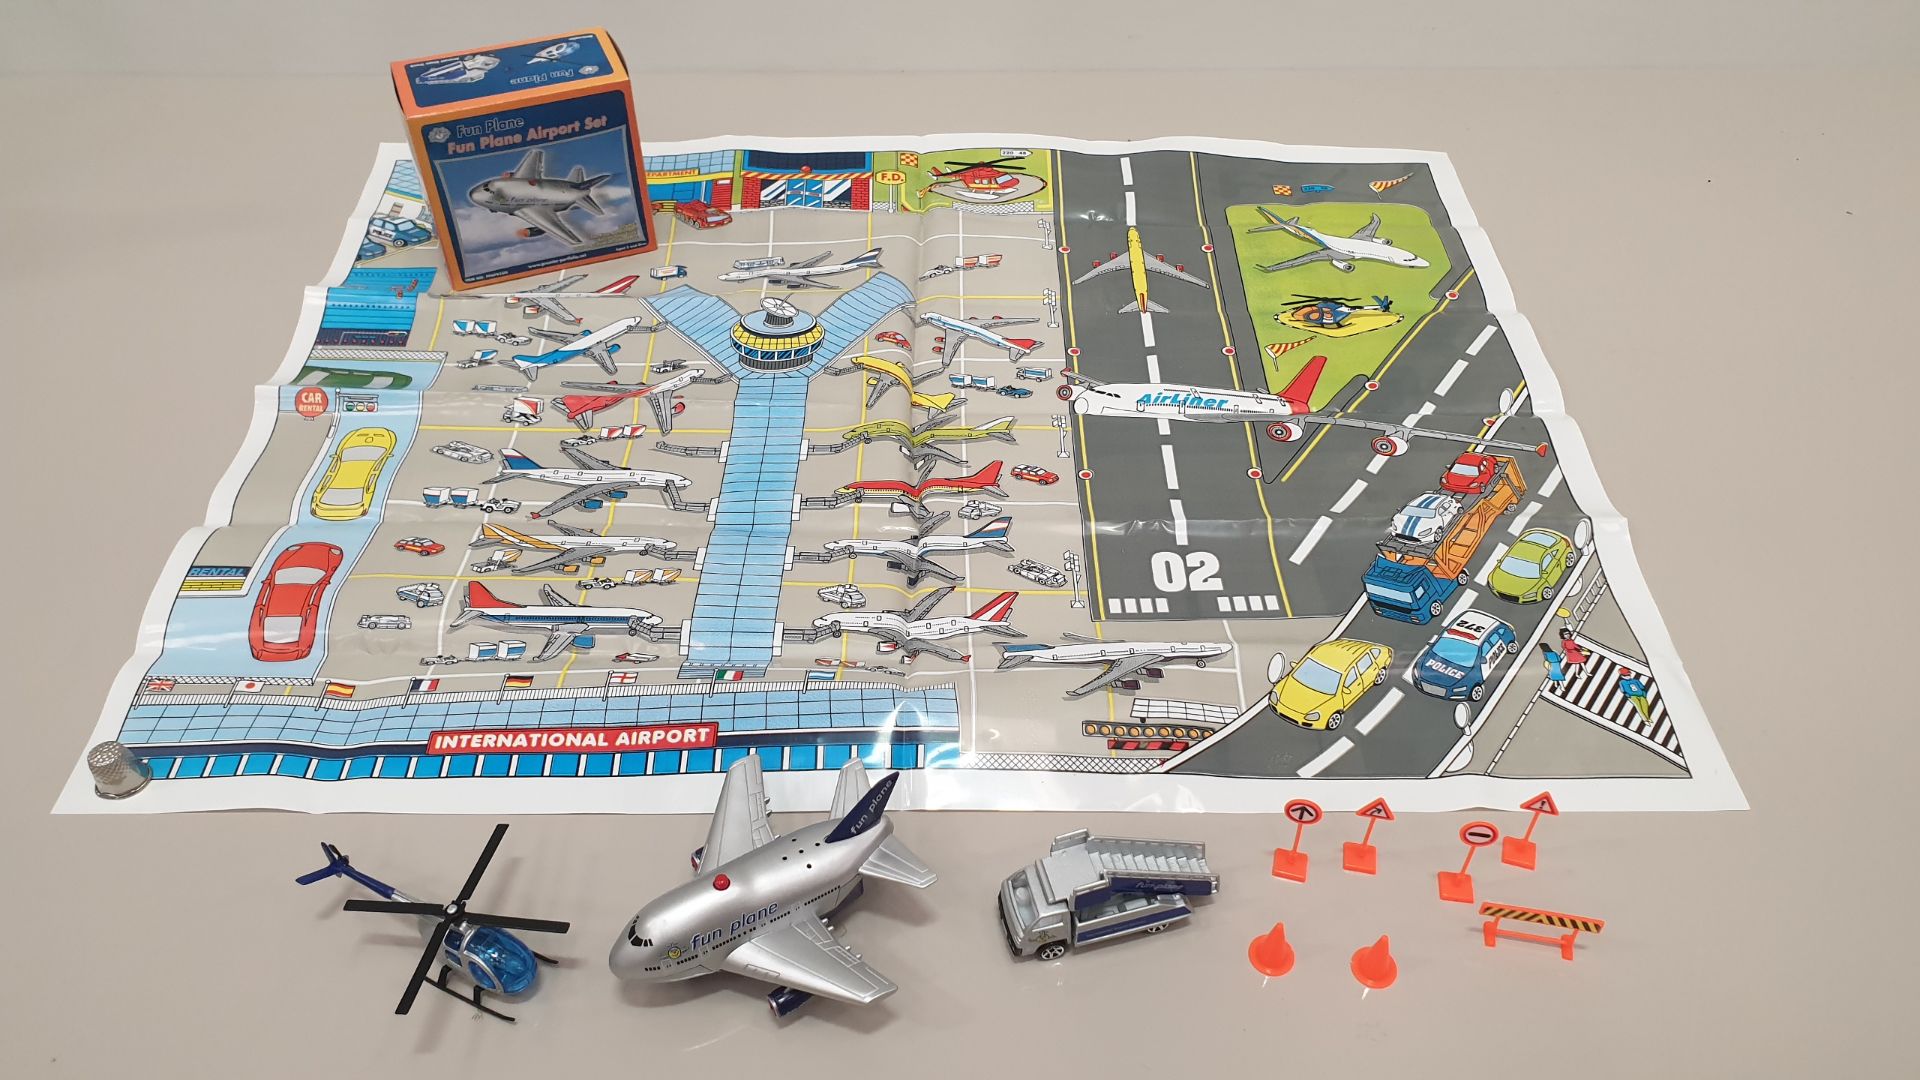 48 X BRAND NEW FUN PLANE AIRPORT SETS - INCLUDES 1 X FUN PLANE (BATTERIES INCLUDED), 1 ROAD MAP, 1